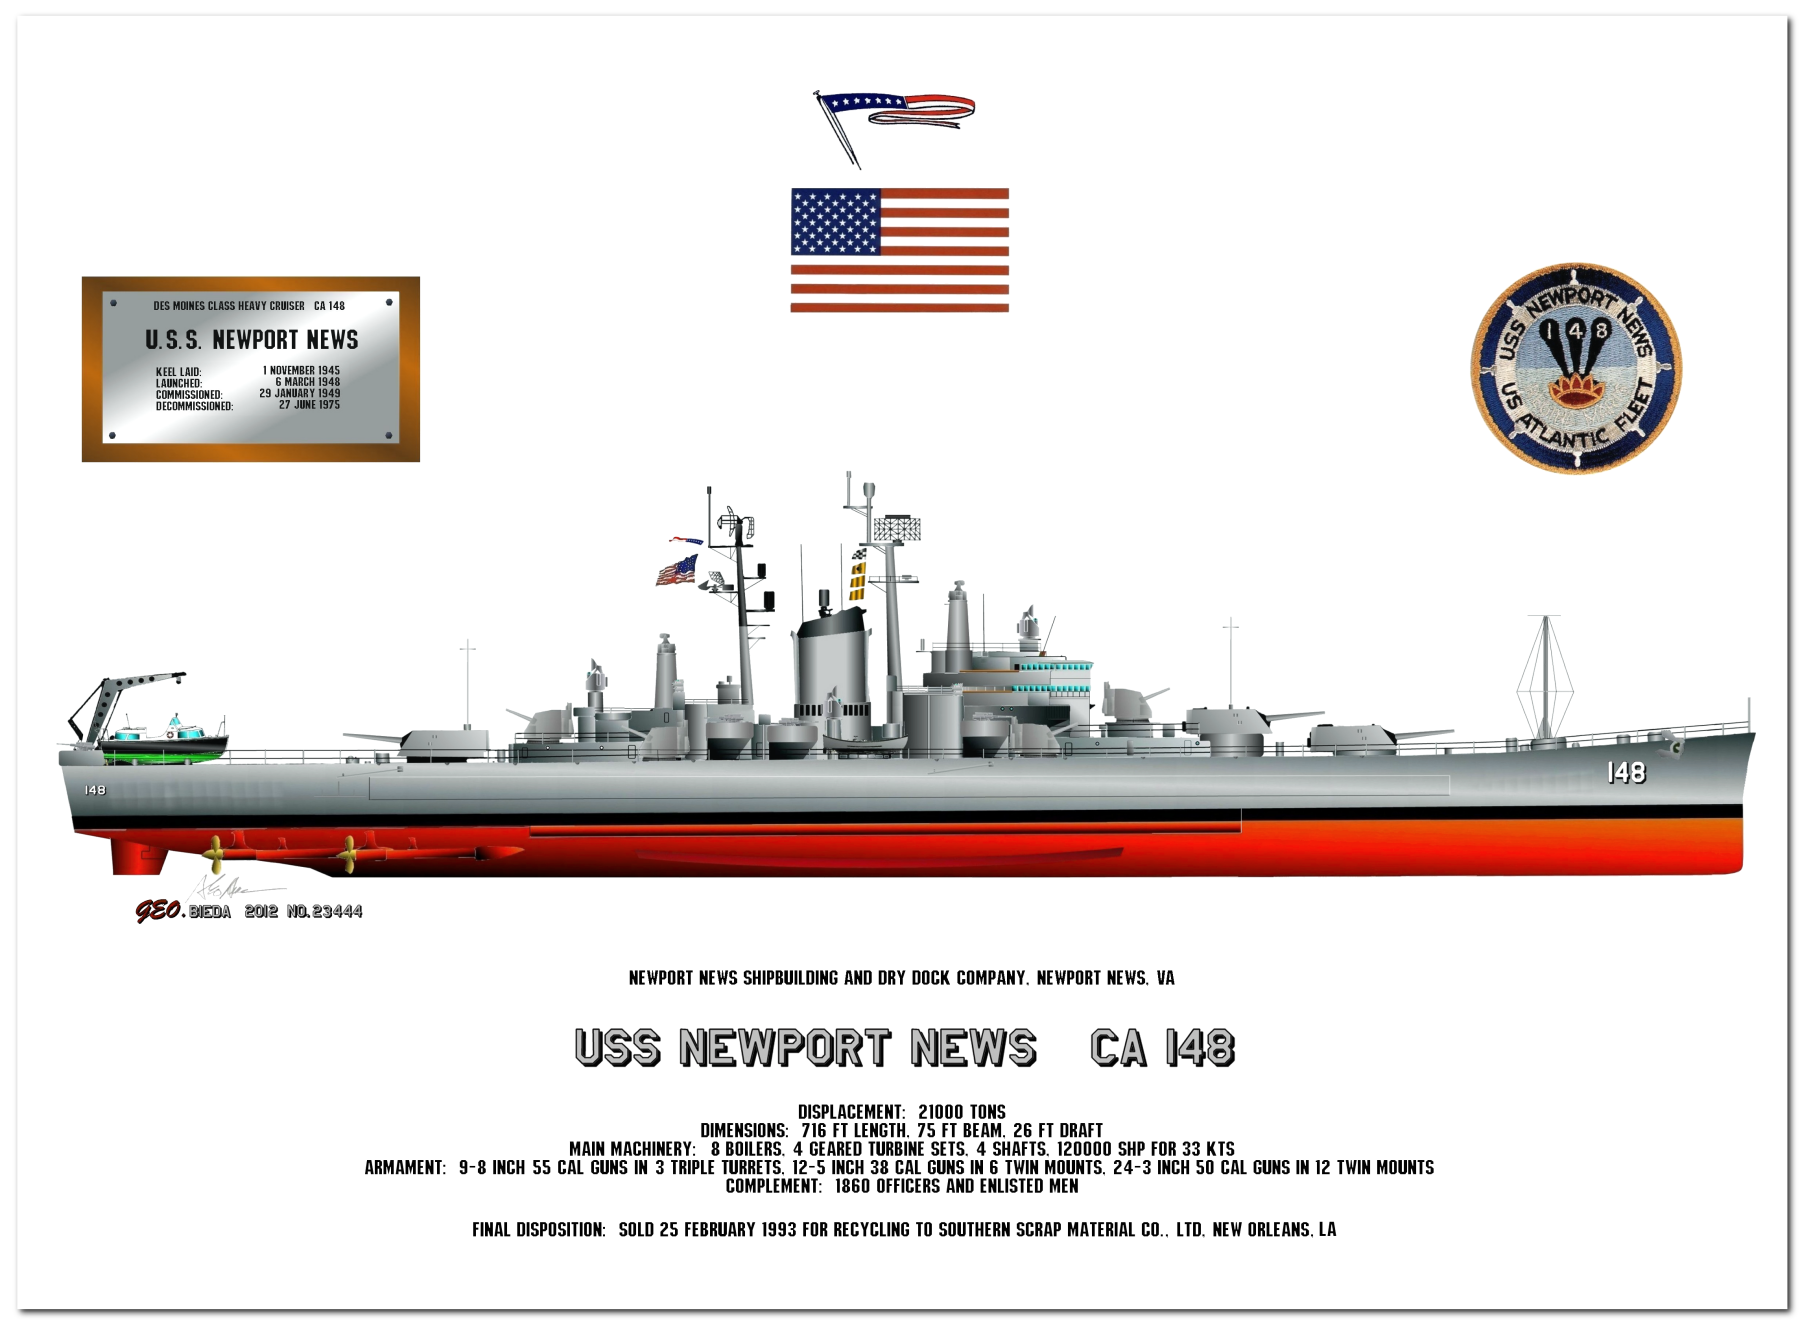 Des Moines Class Cruiser Profile Drawings by George Bieda